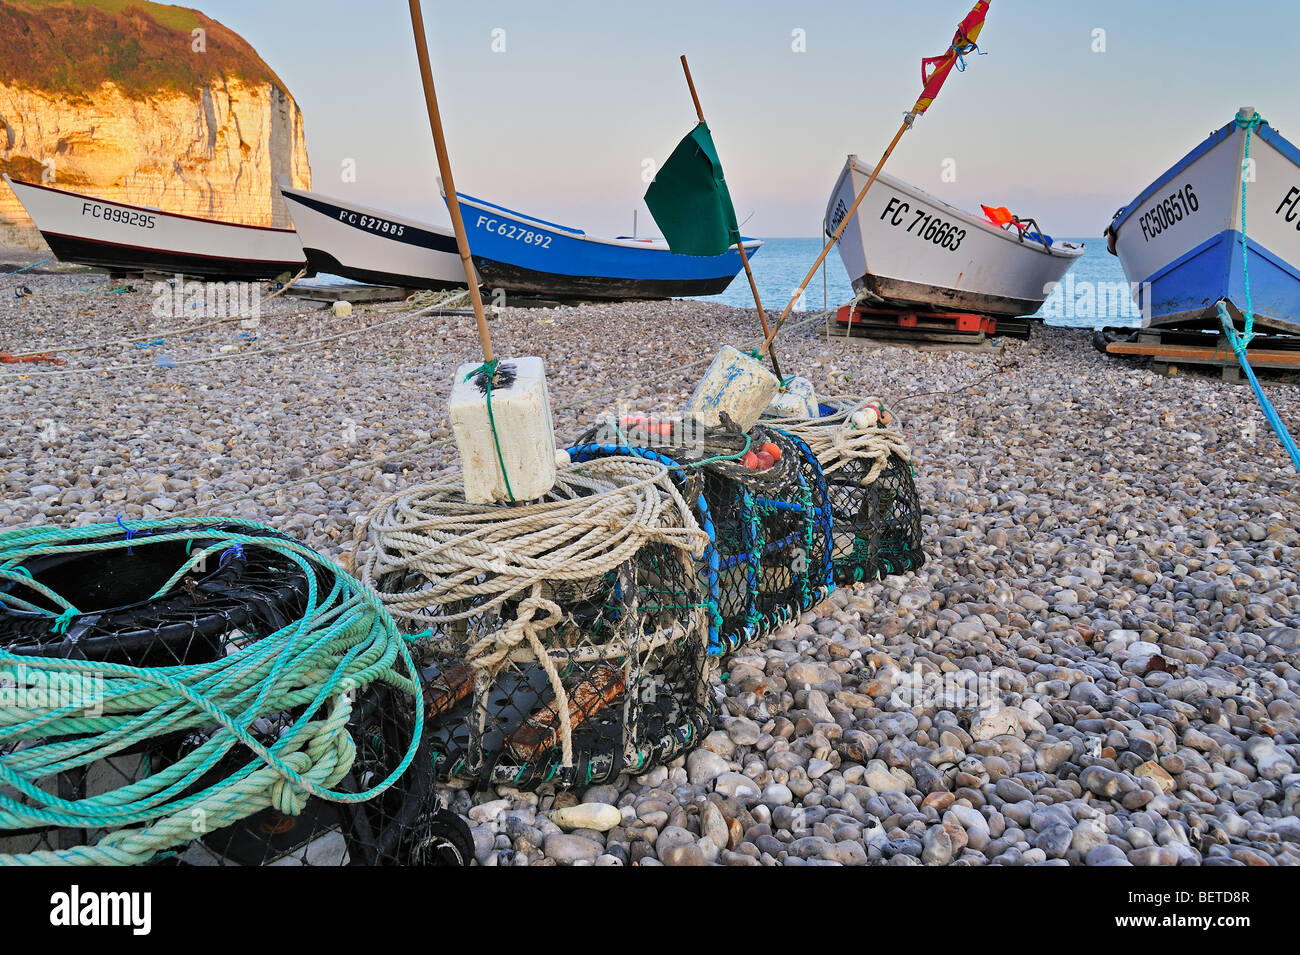 Lobster traps and colourful traditional caïques, wooden fishing boats on the beach at Yport, Normandy, Côte d'Albâtre, France Stock Photo